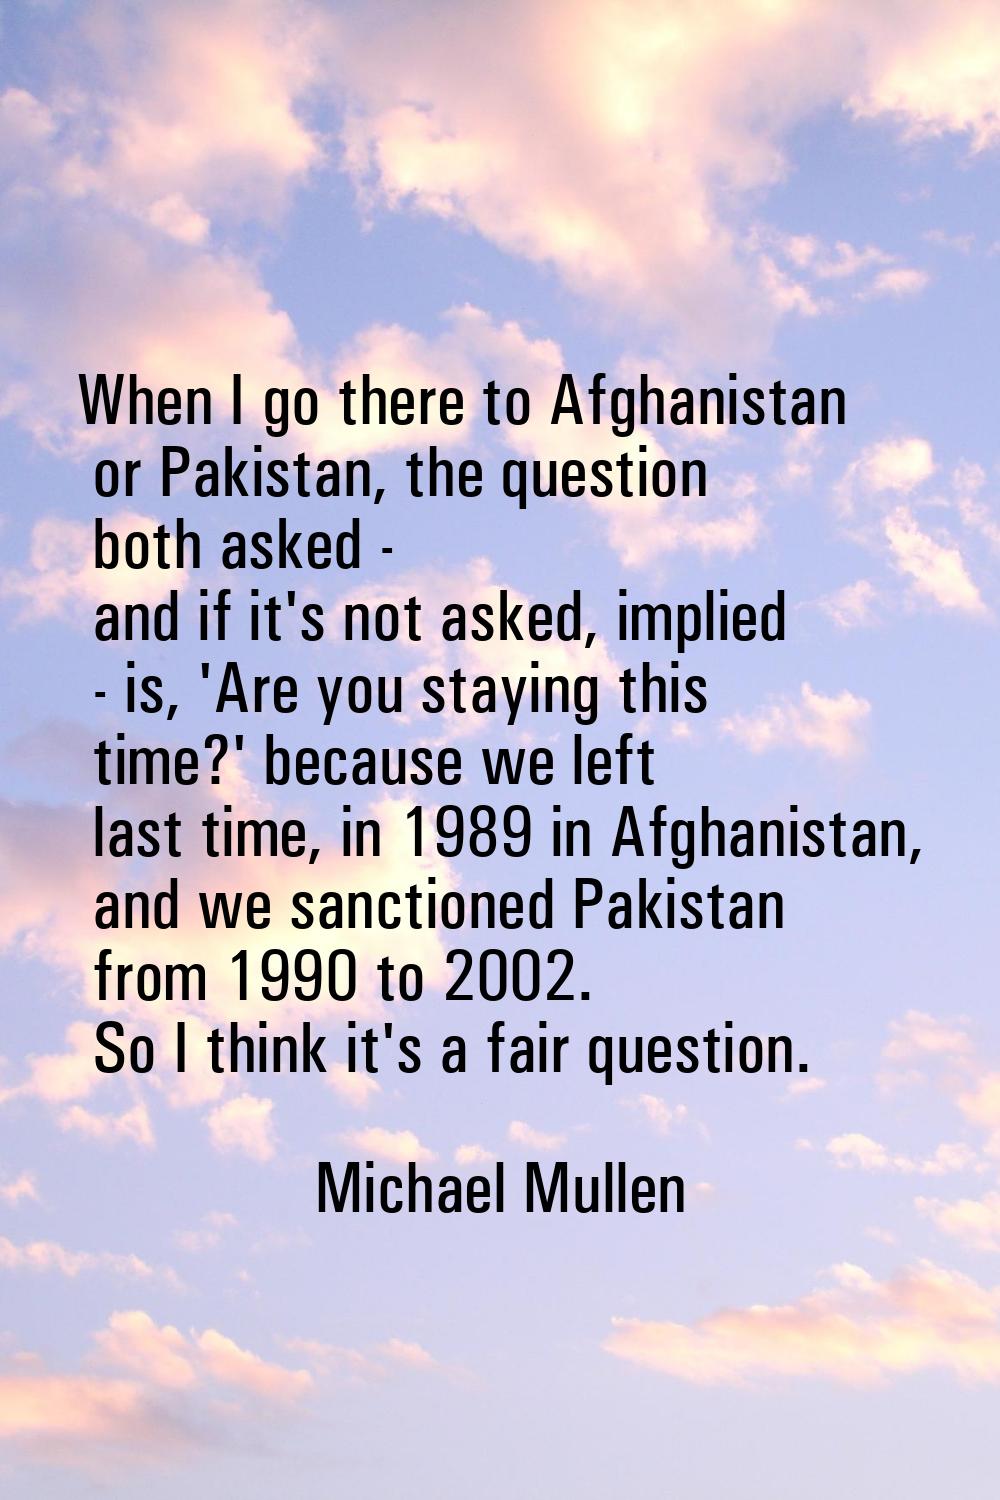 When I go there to Afghanistan or Pakistan, the question both asked - and if it's not asked, implie